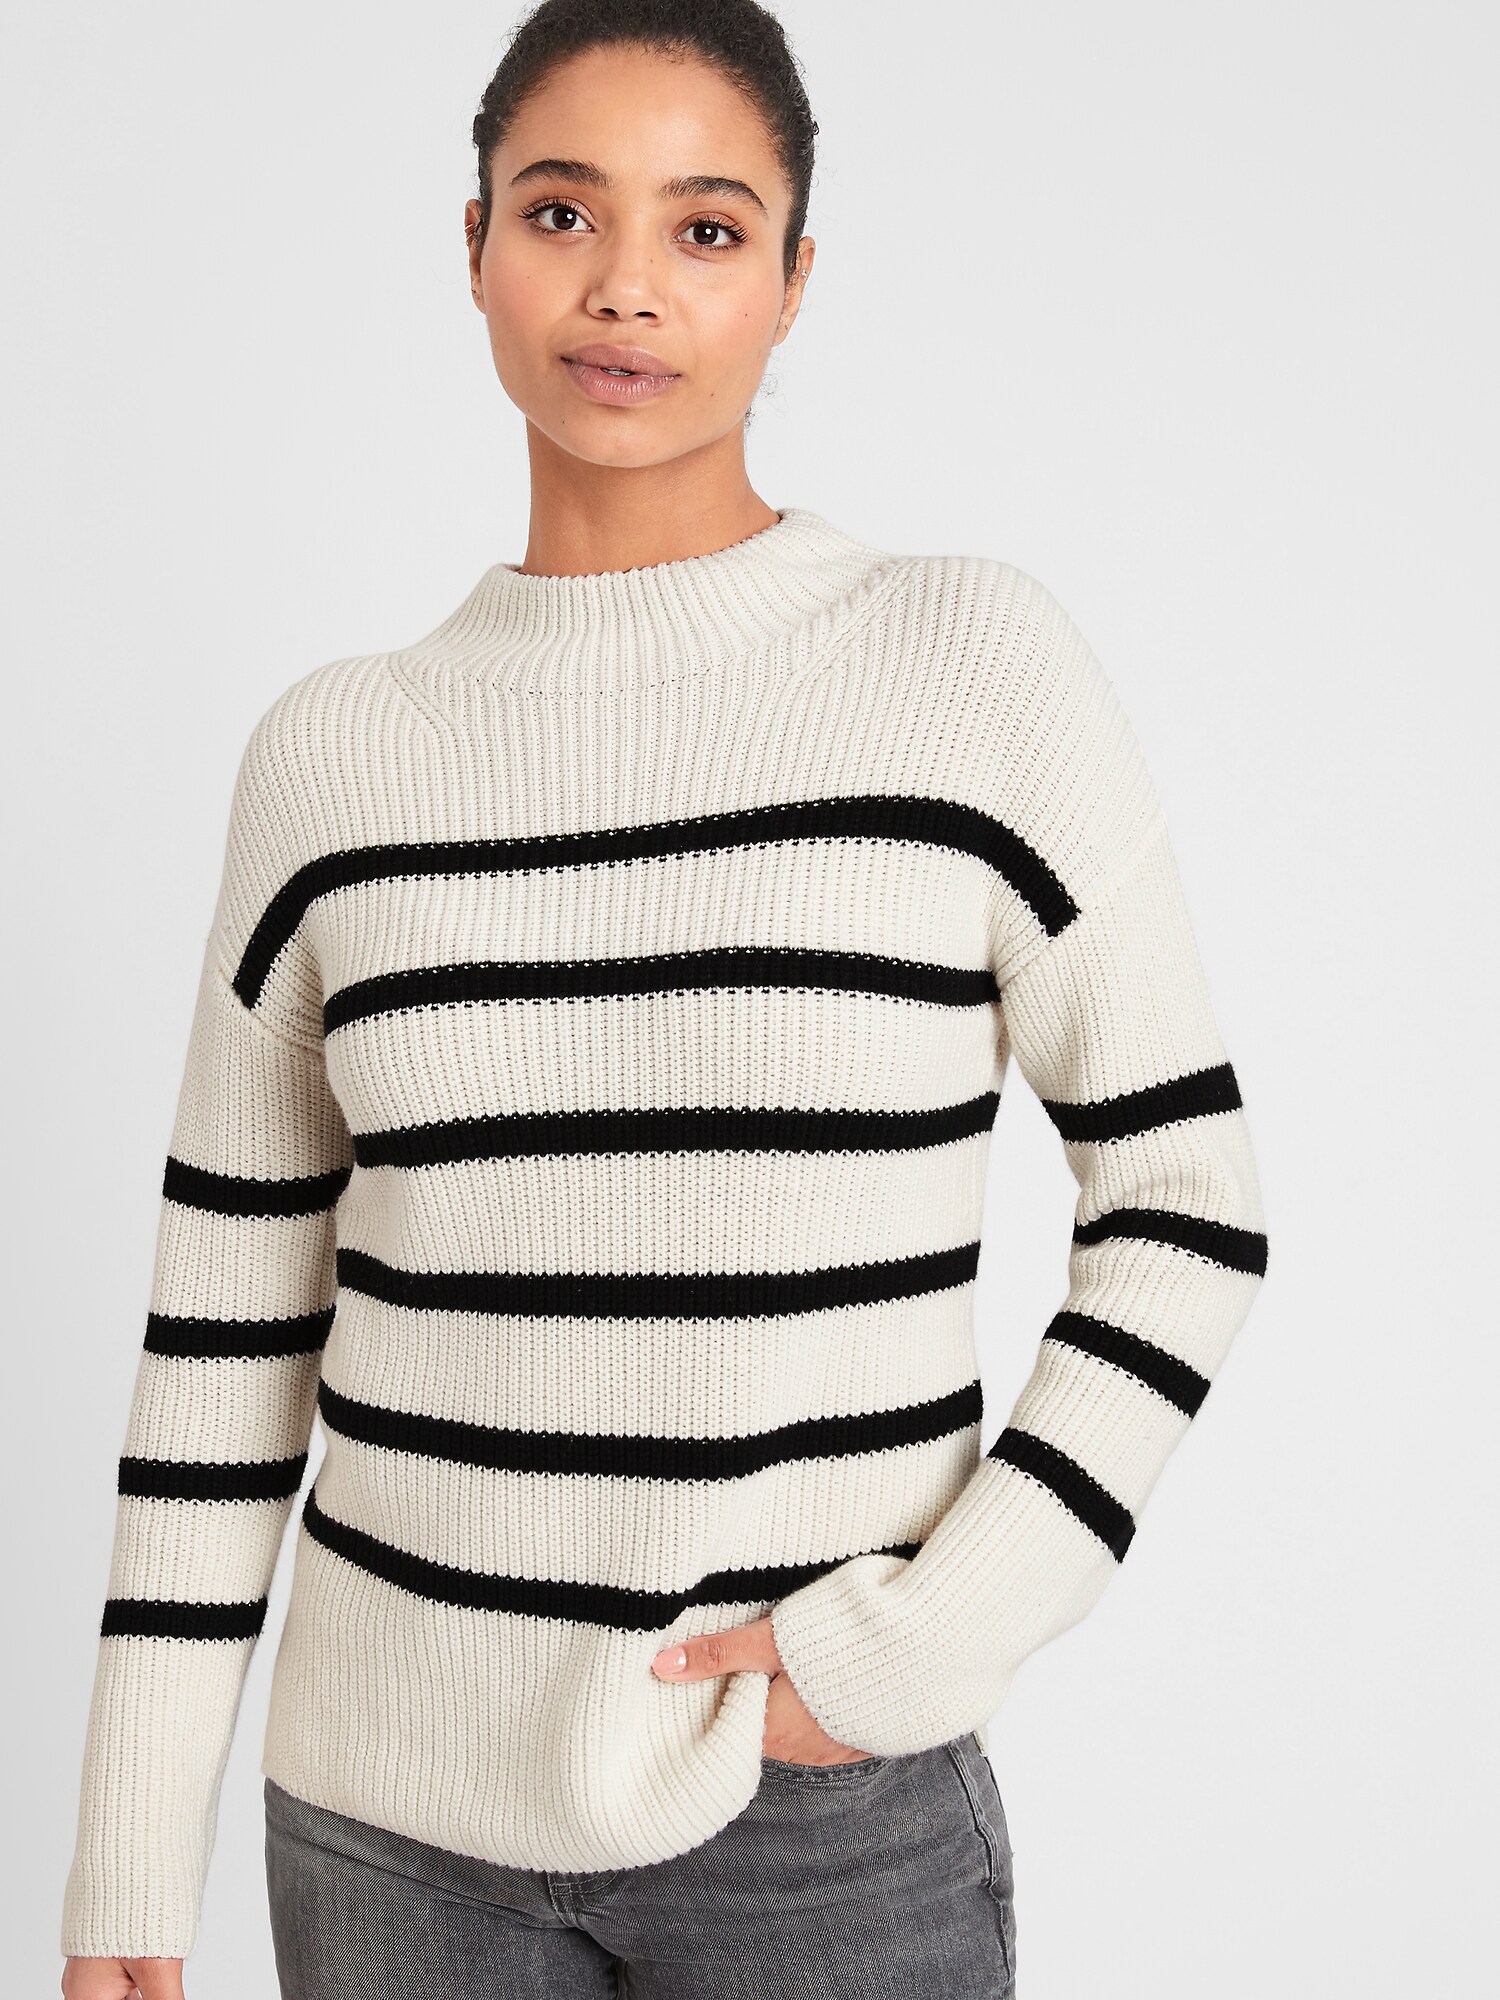 Textured Striped Mock-Neck Sweater